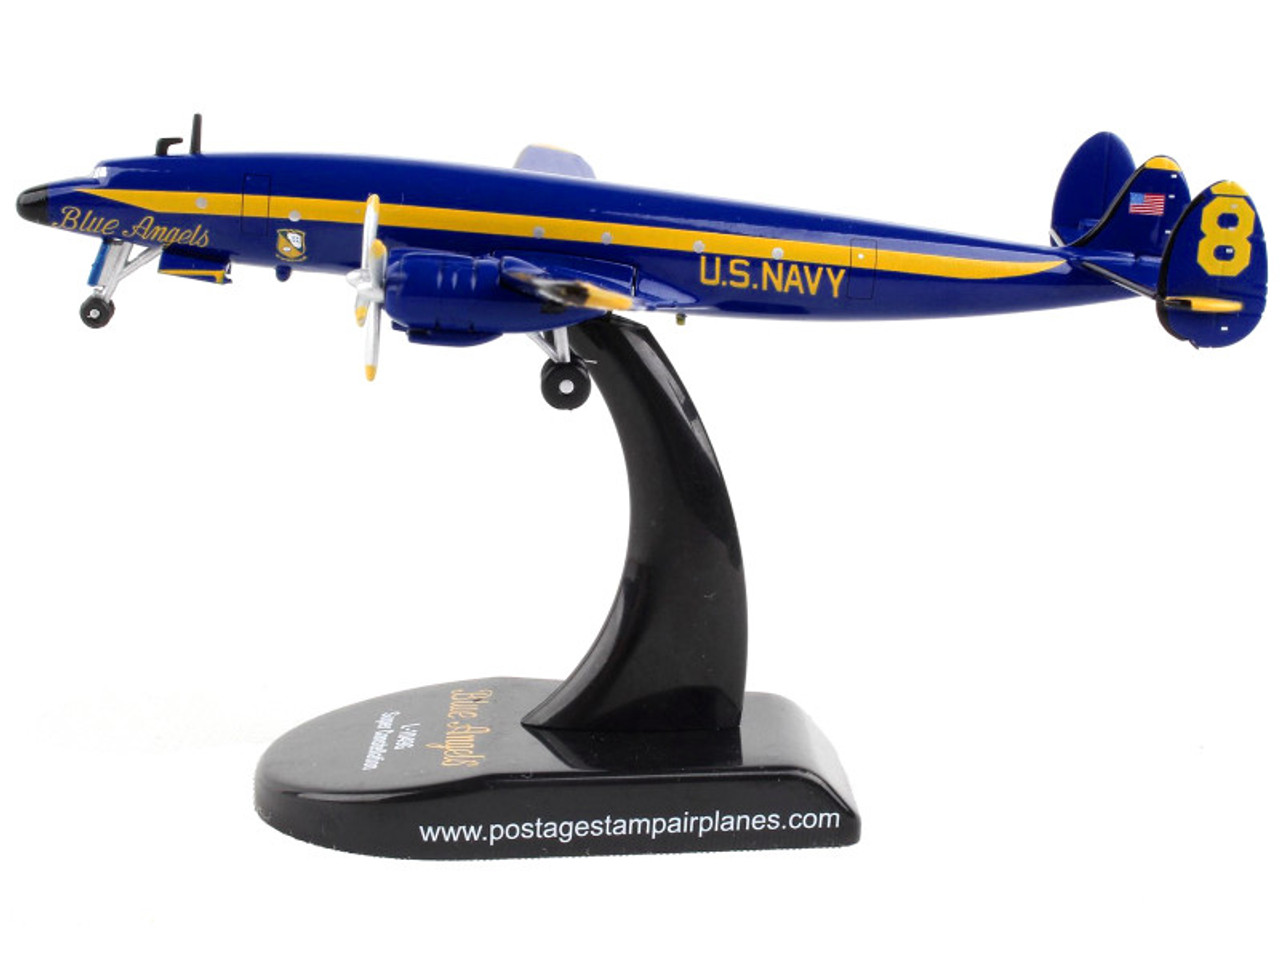 Lockheed L-1049G Super Constellation Commercial Aircraft "Blue Angels" United States Navy 1/300 Diecast Model Airplane by Postage Stamp